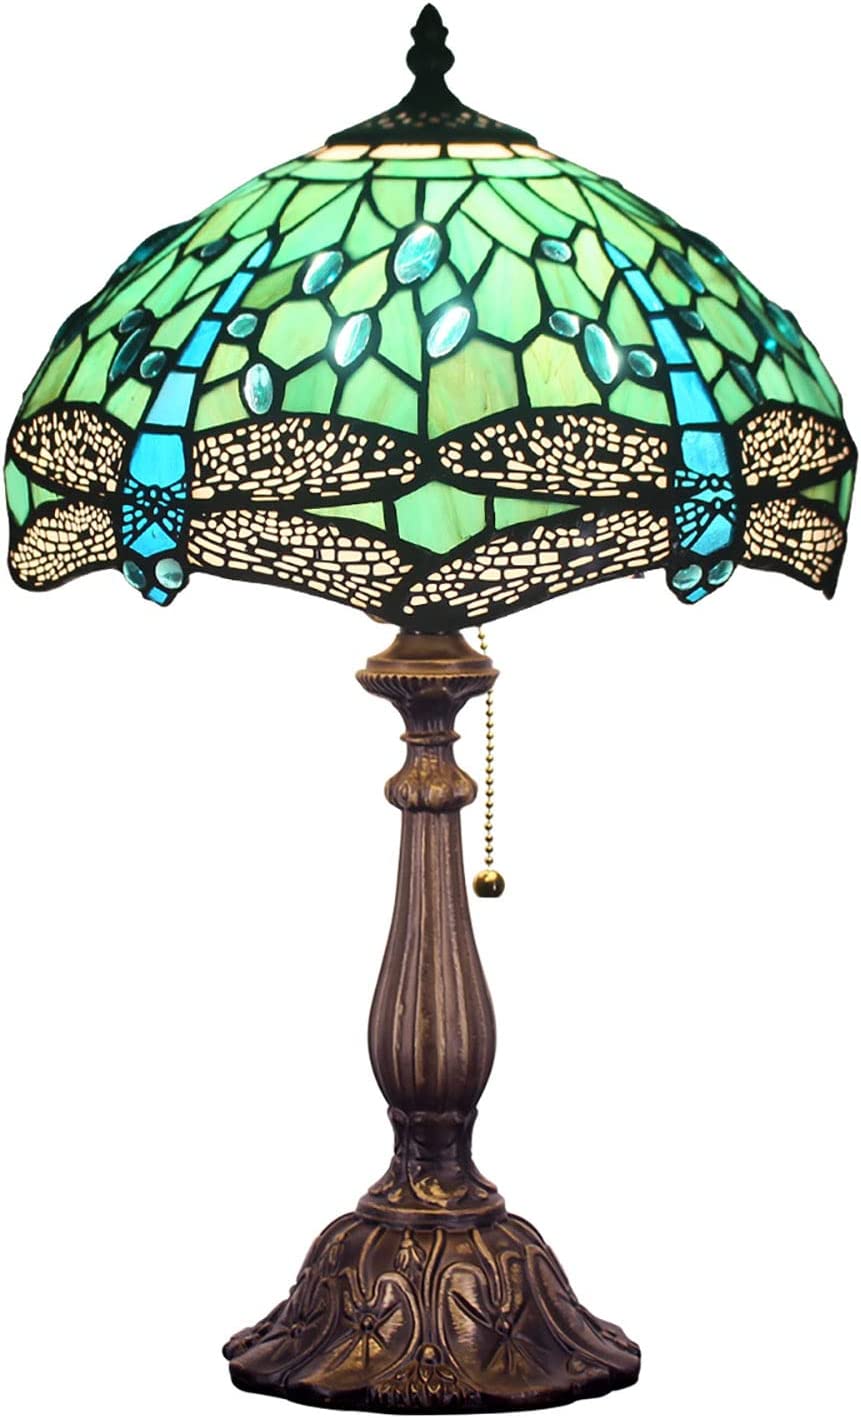 SHADY  Lamp W12H19 Inch Green Stained Glass Dragonfly Style Table Reading Lamp Nightstand Bedside Desk Light Decor Living Room Bedroom Home Office Work Study Pull Chain Switch